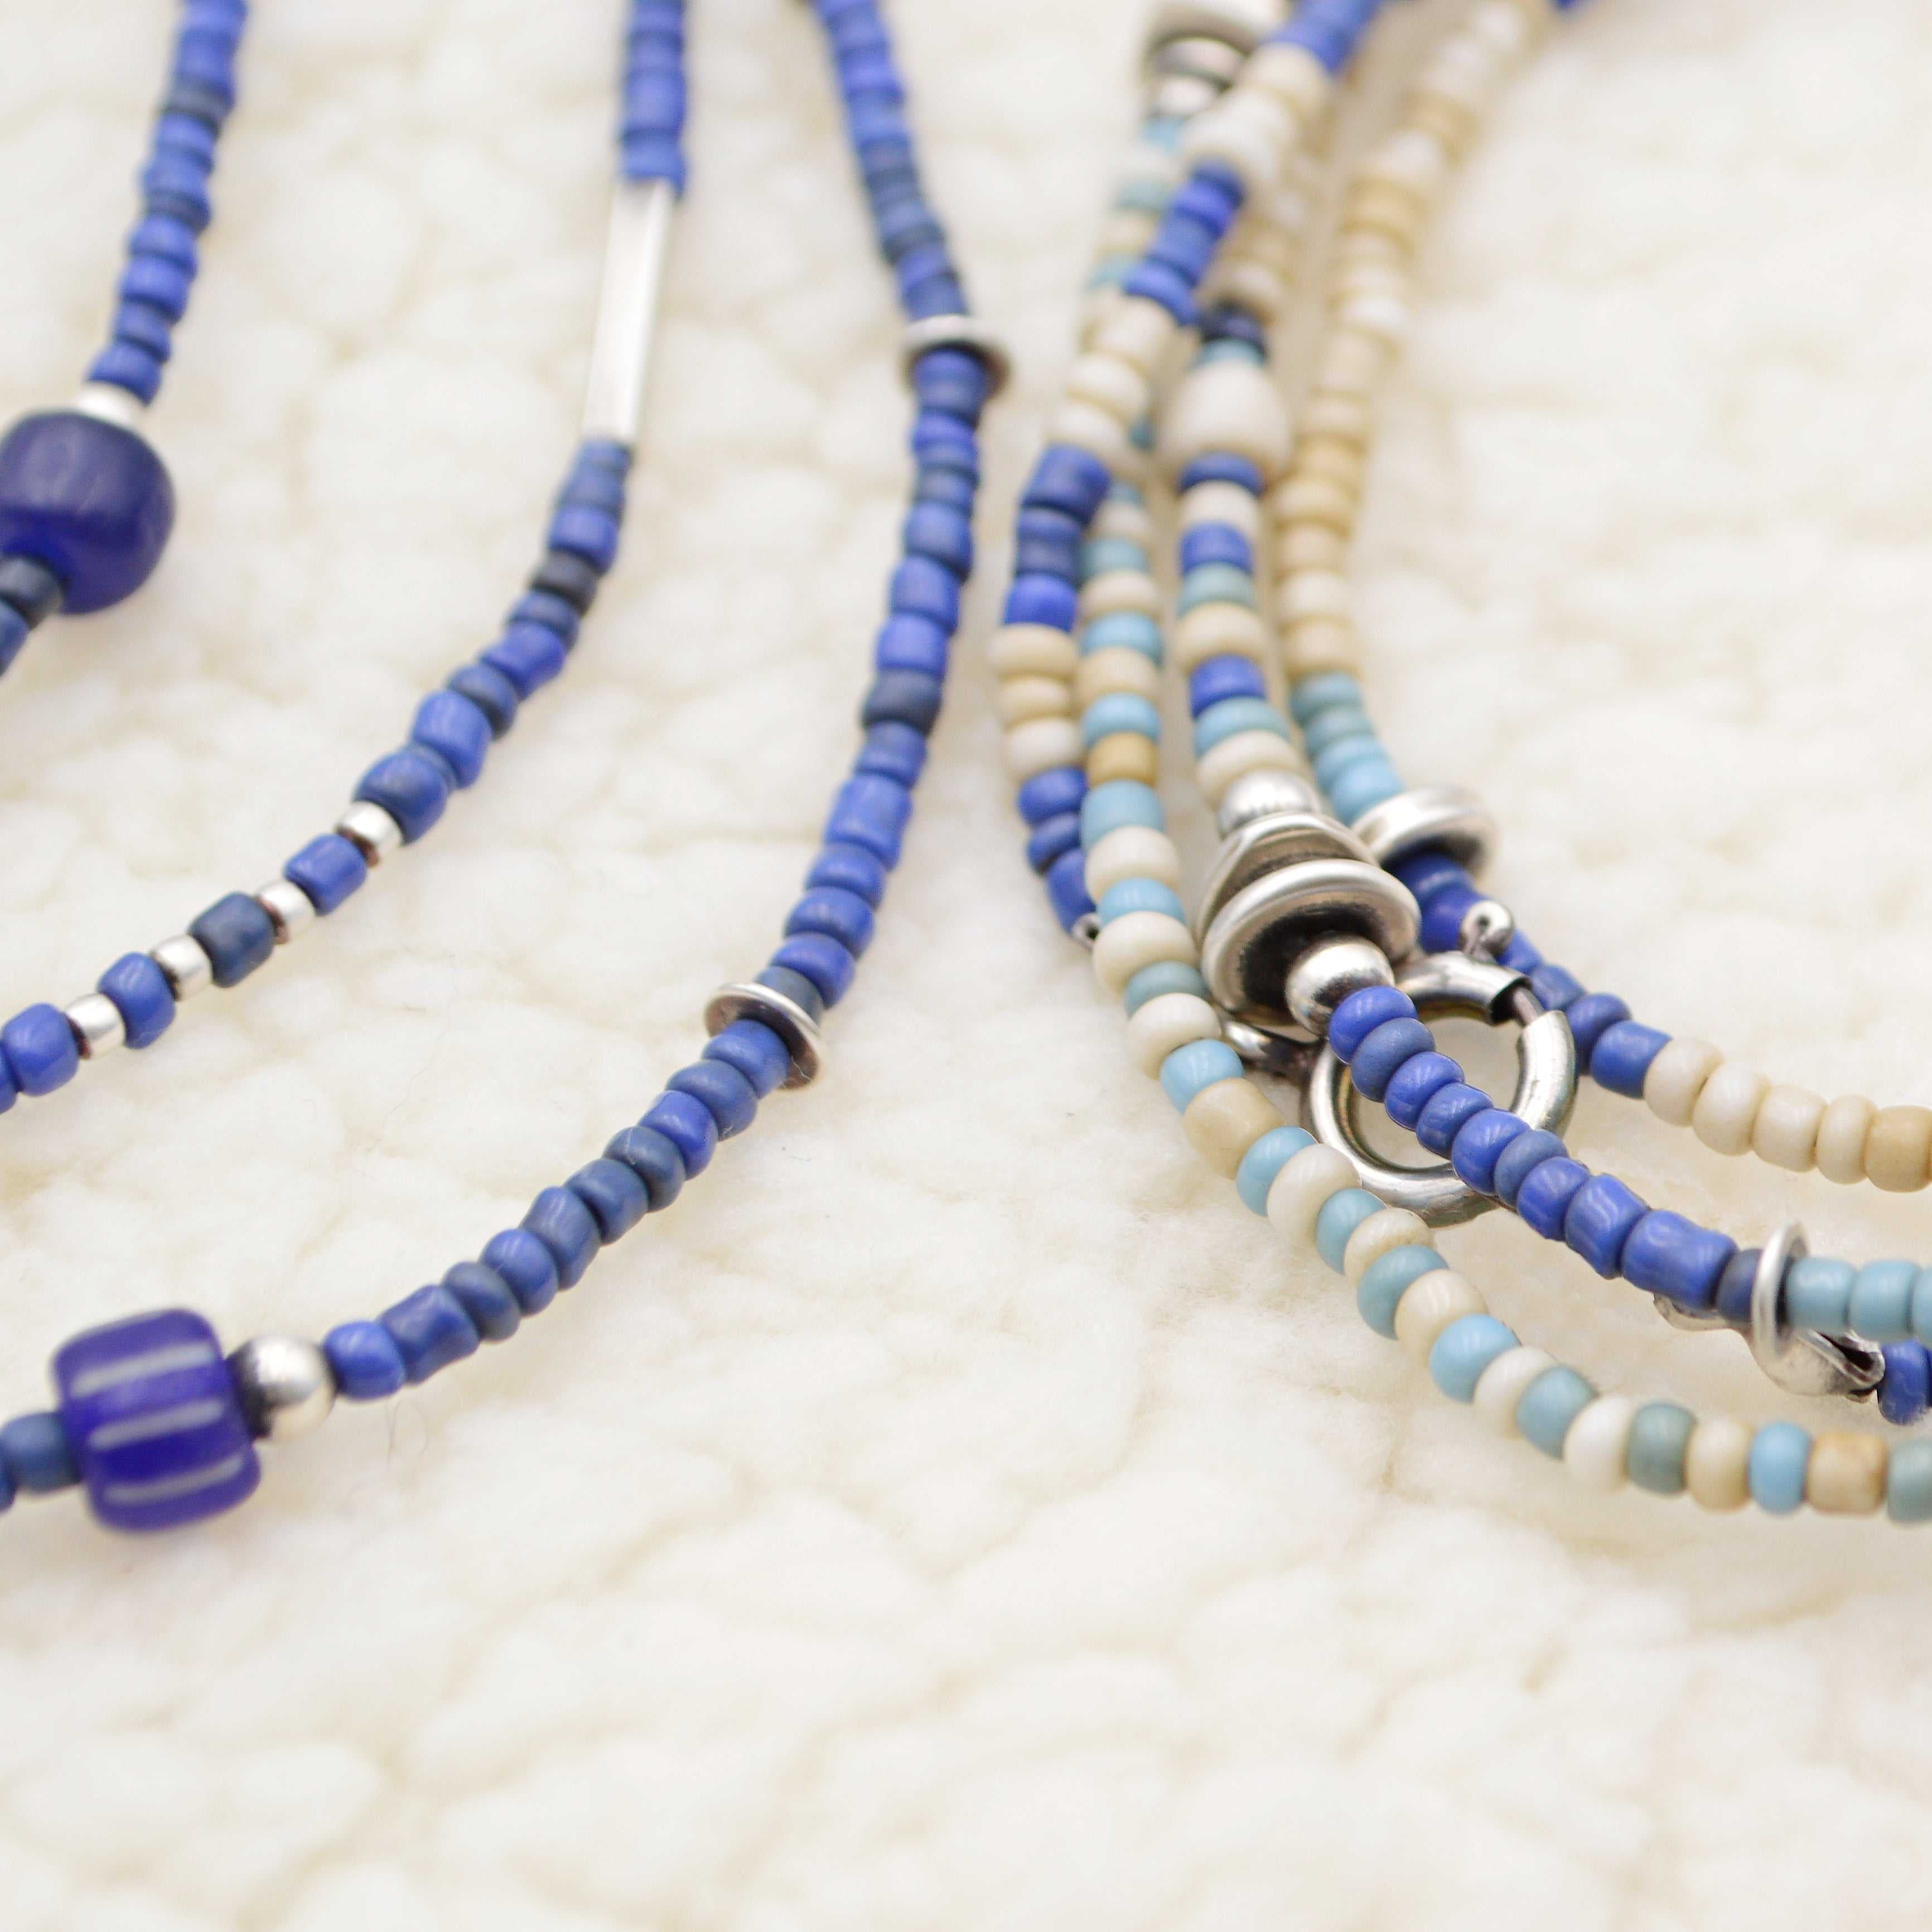 Blue Java Seed Bead and Sterling Necklace